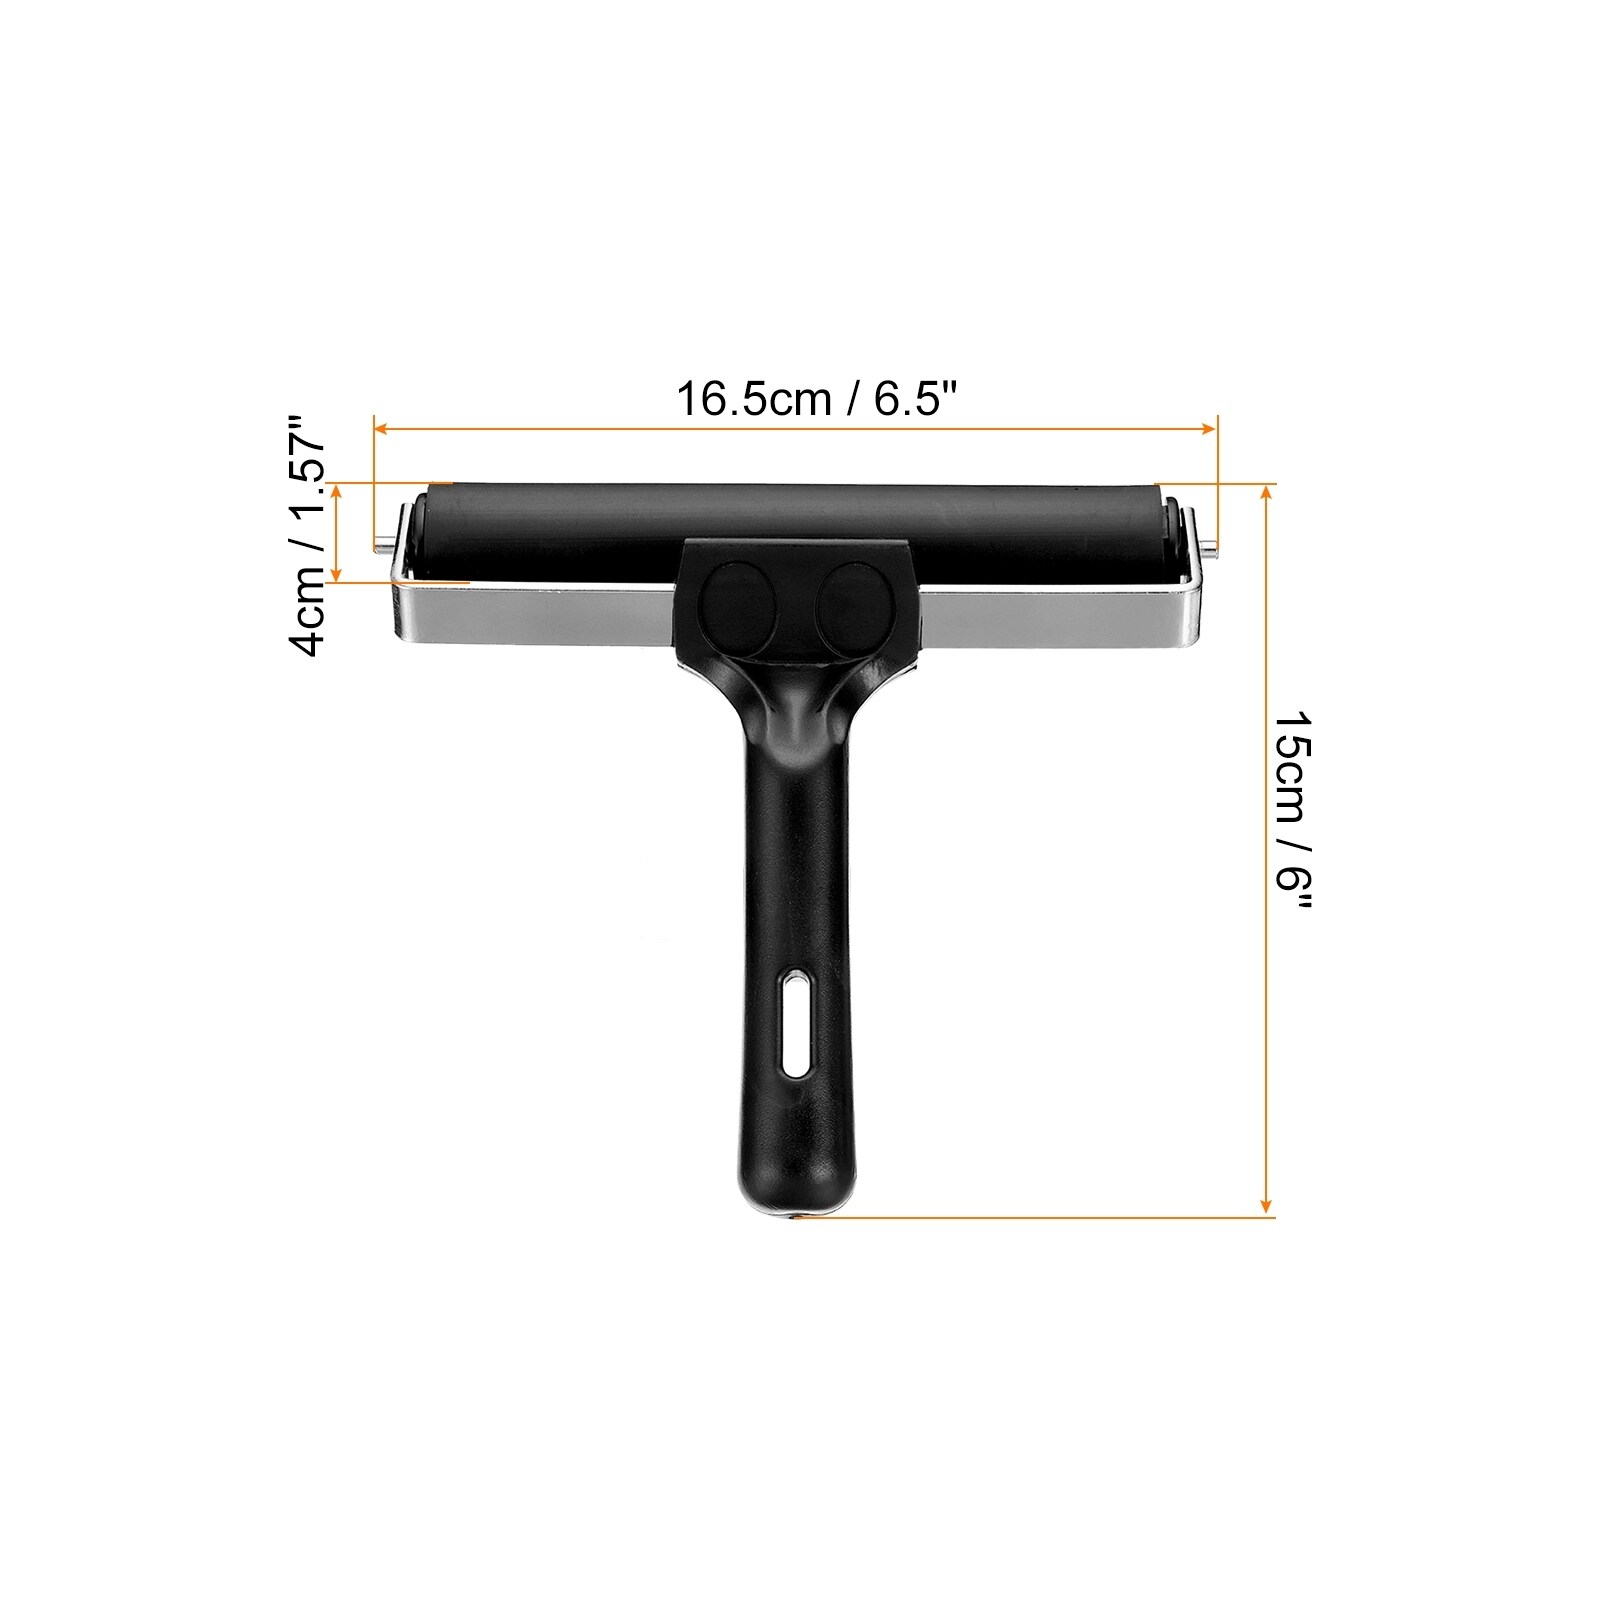 4.5 Rubber Roller Brayer Tool for Printmaking Art Ink Stamping Tape -  Black - On Sale - Bed Bath & Beyond - 38236356